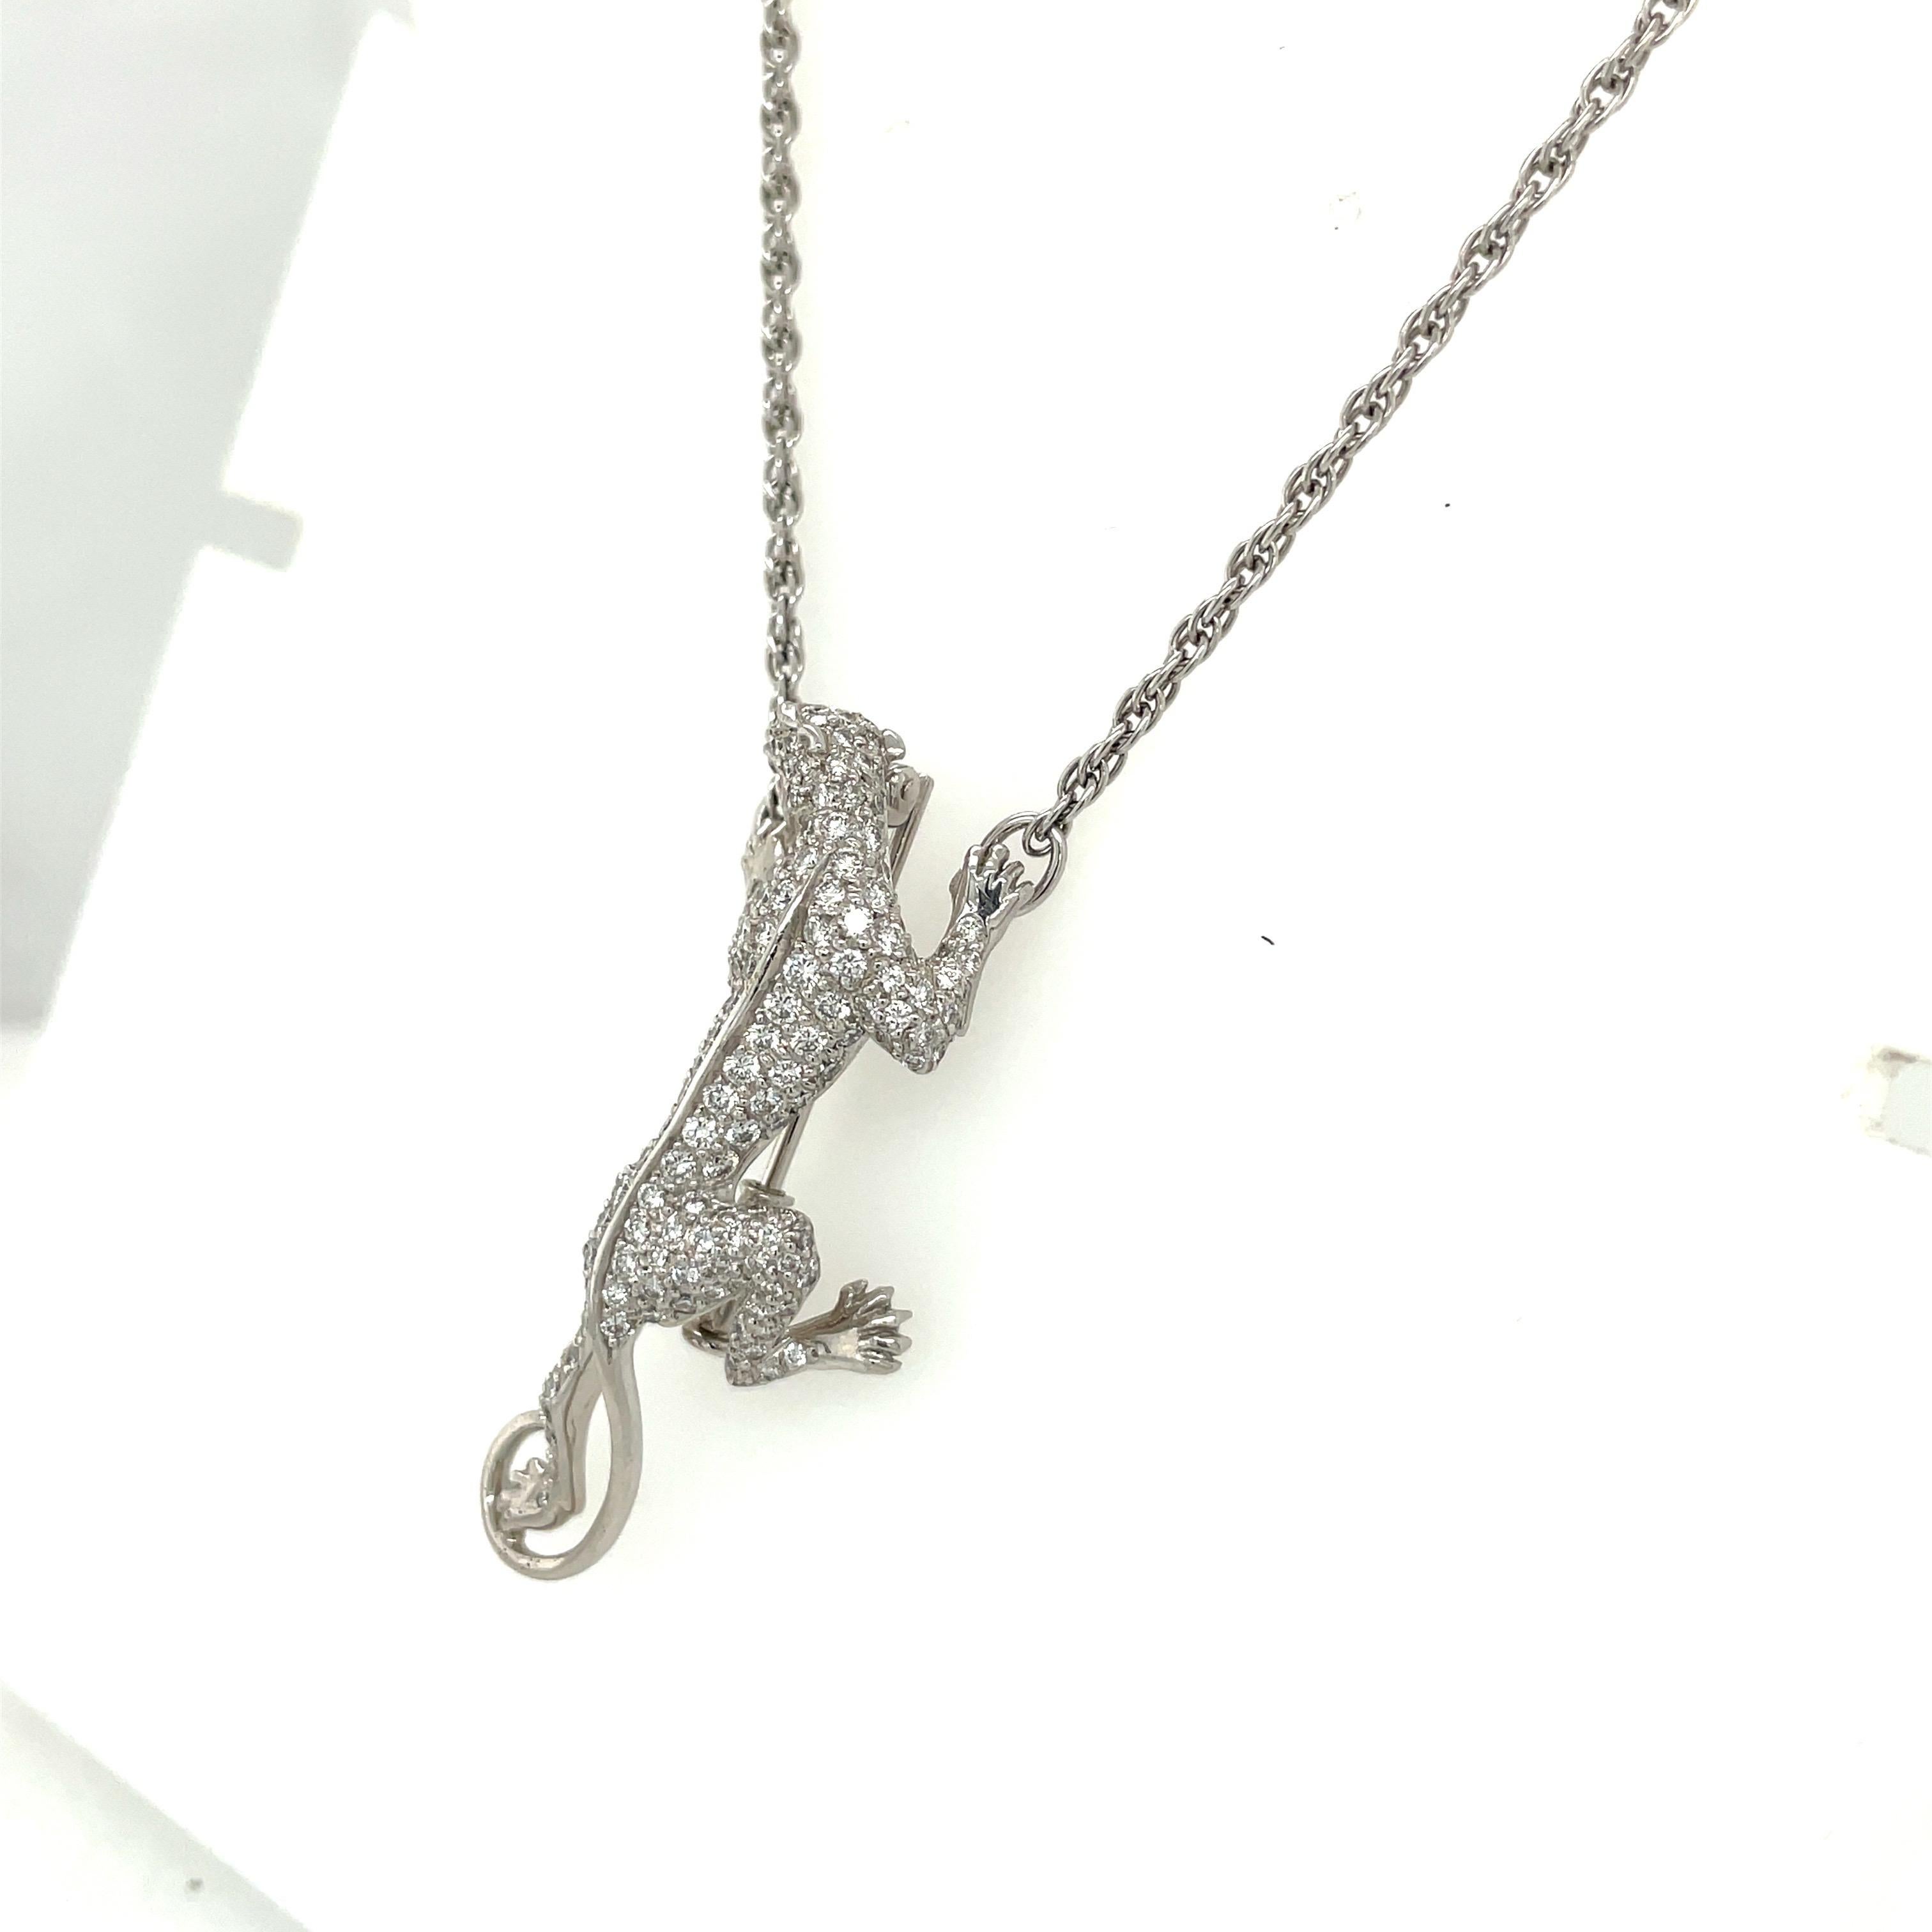 Contemporary Carrera y Carrera 18kt White Gold 1.56ct. Diamond Panther Pendant / Brooch